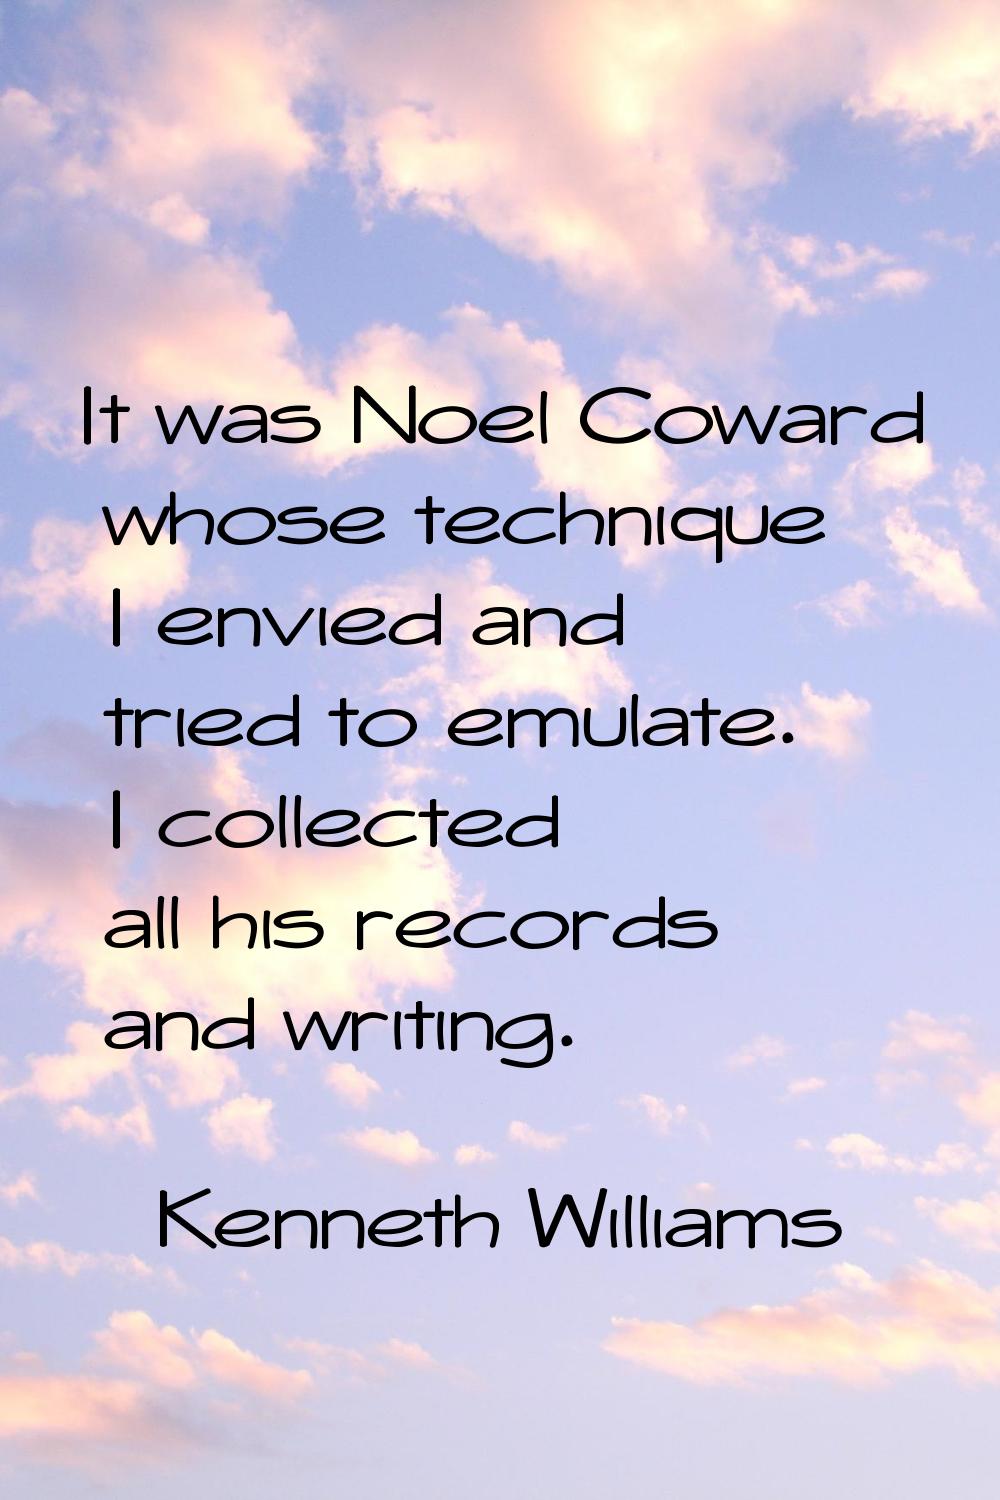 It was Noel Coward whose technique I envied and tried to emulate. I collected all his records and w